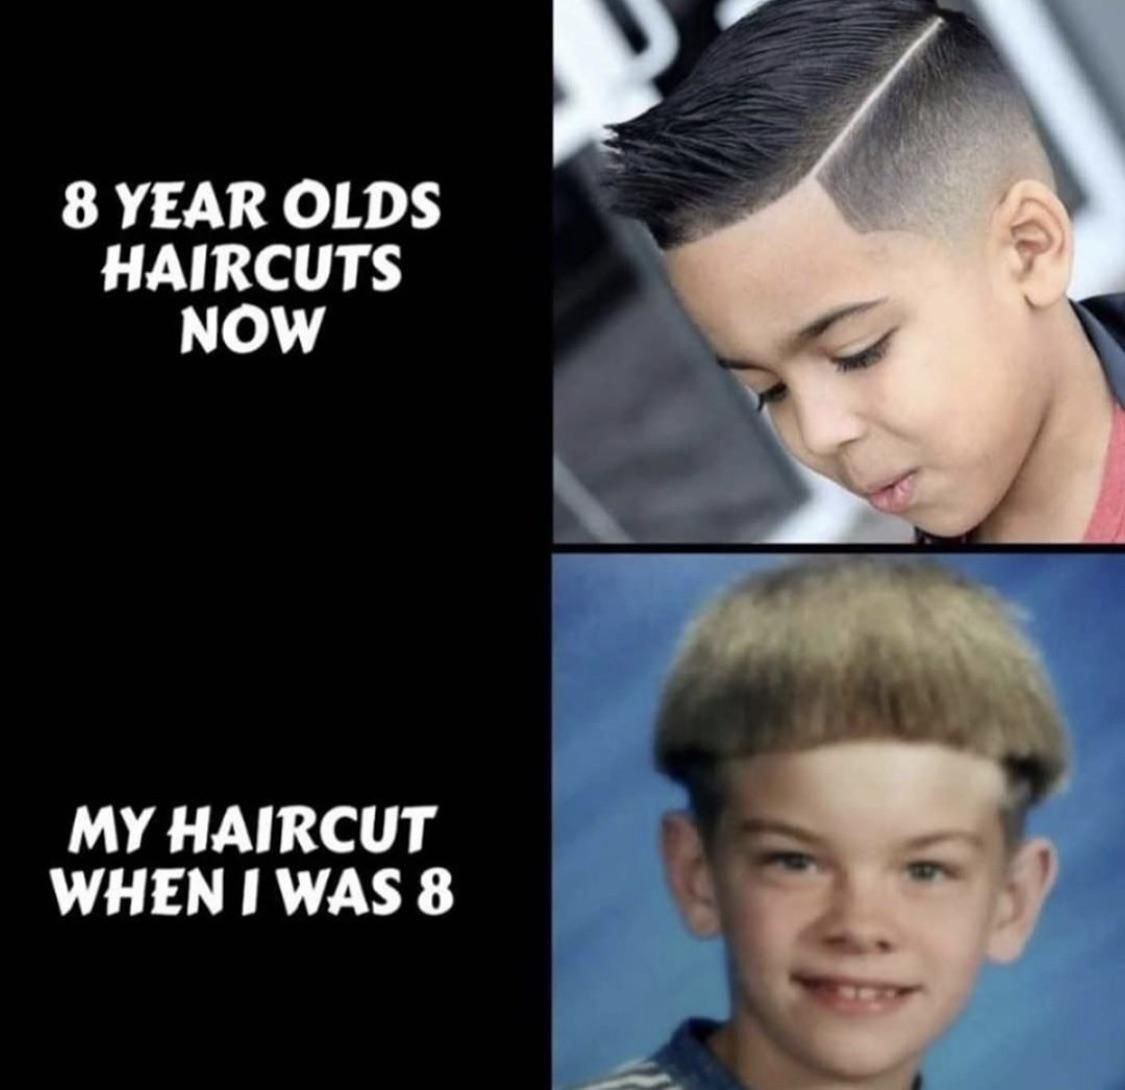 Haircuts now and then.